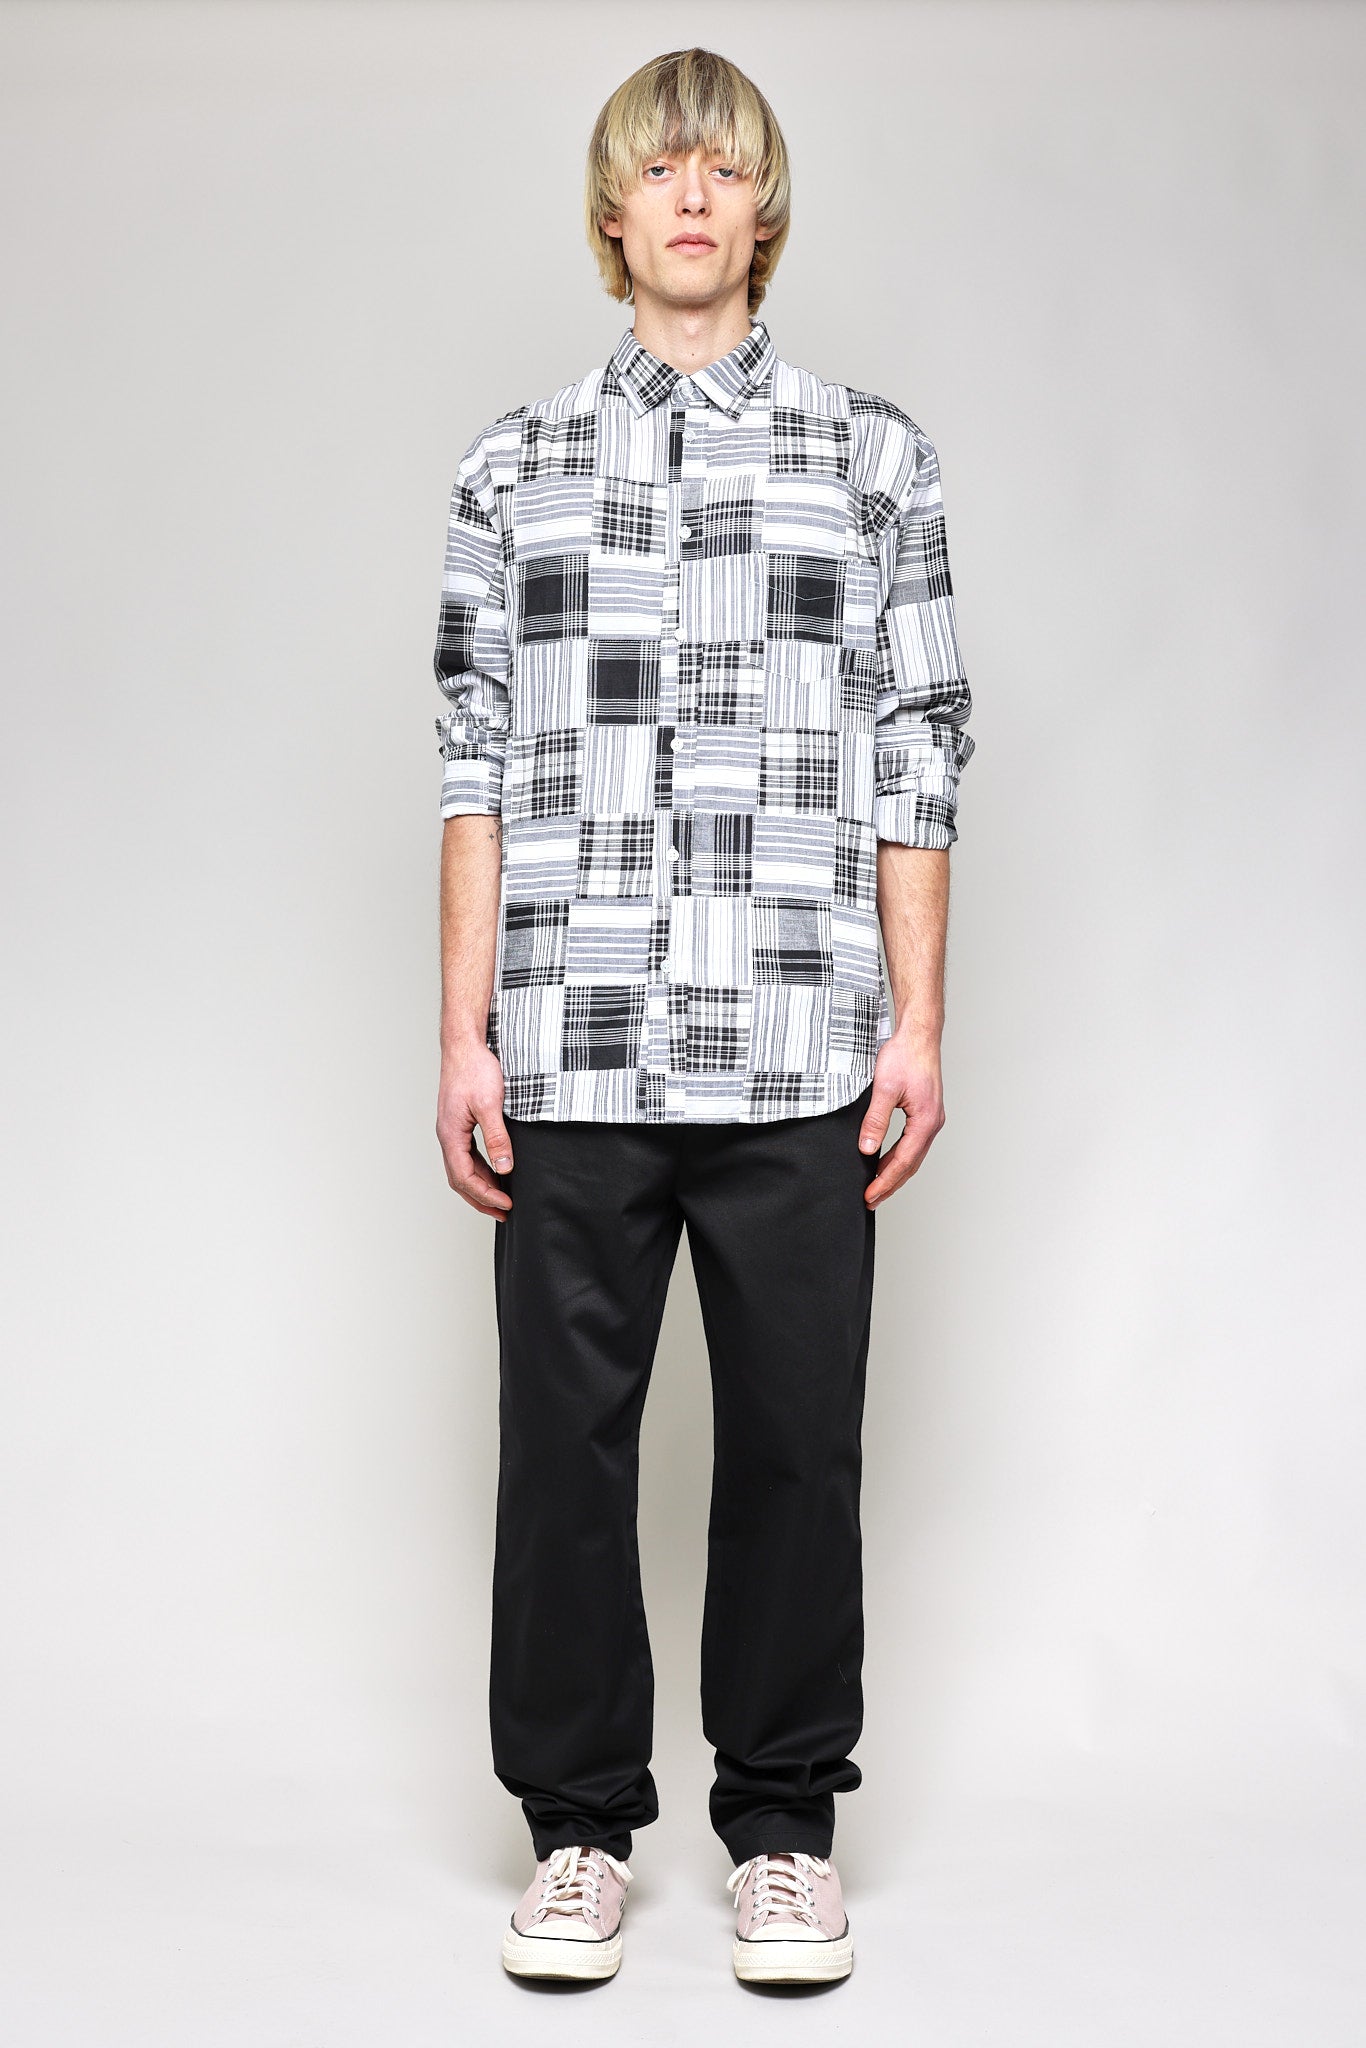 Japanese Patchwork Plaid in Black and White 05